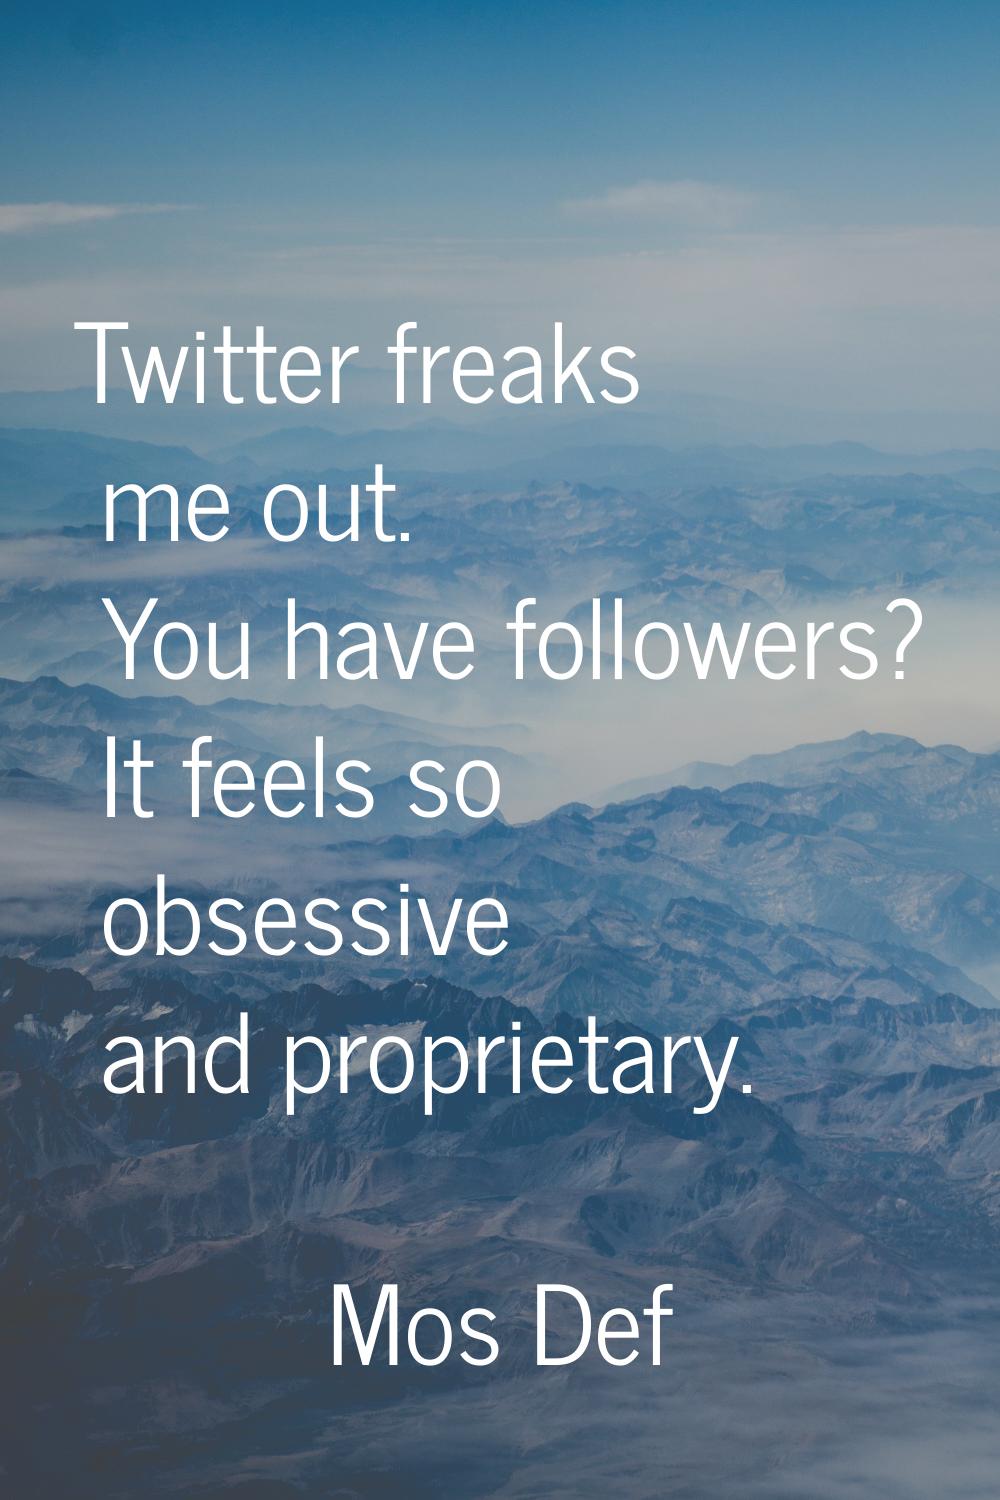 Twitter freaks me out. You have followers? It feels so obsessive and proprietary.